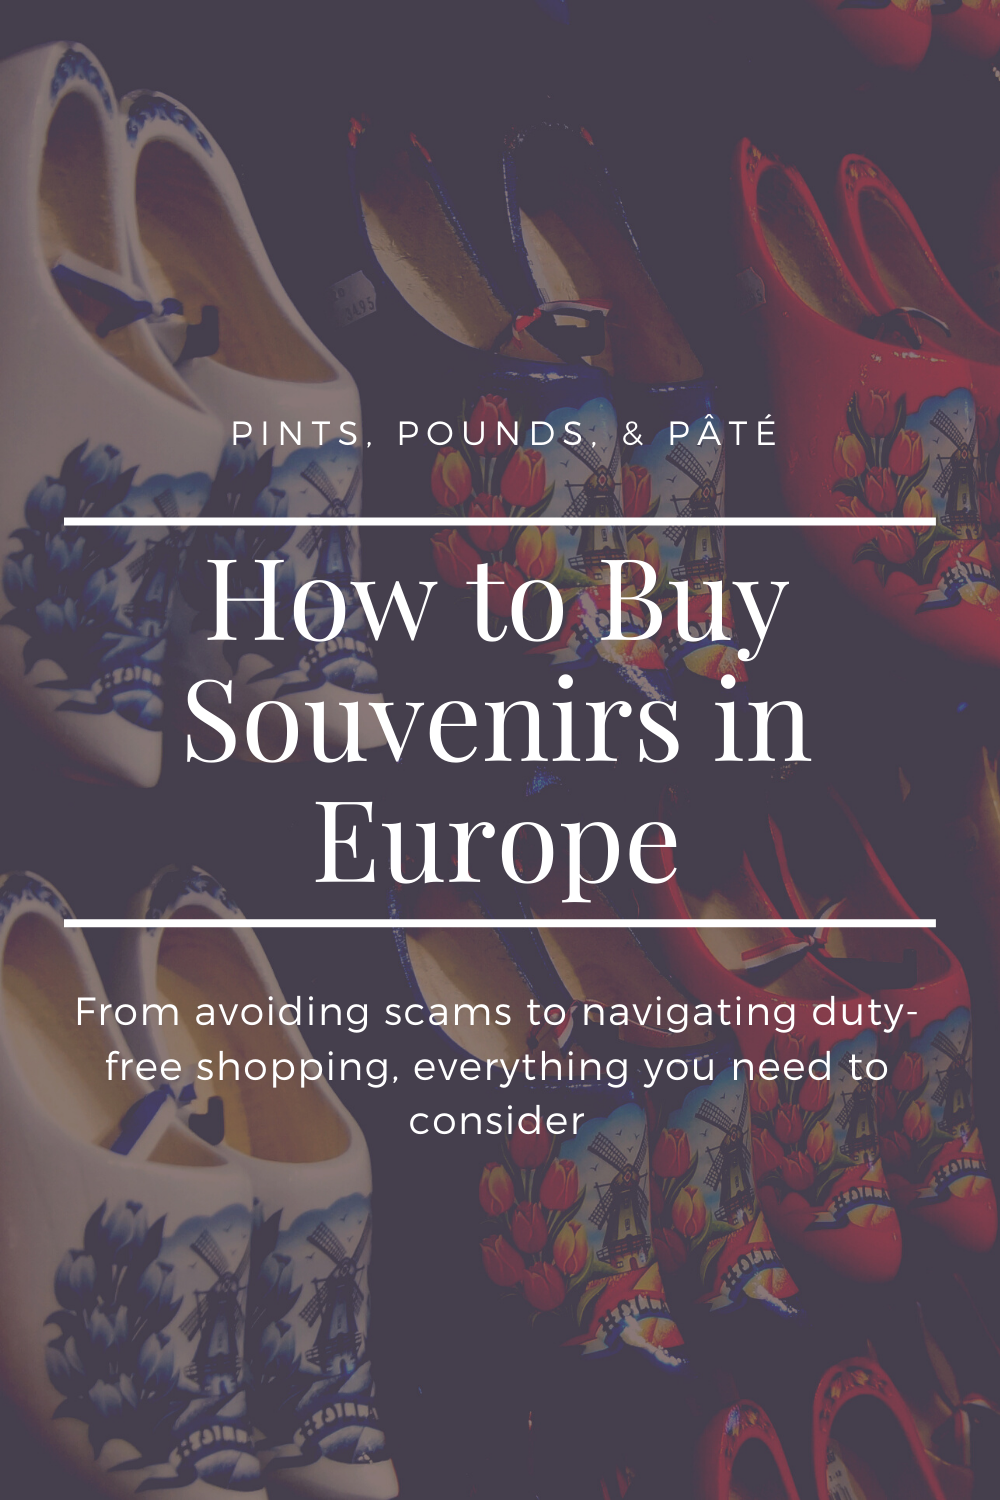 Buying Souvenirs in Europe